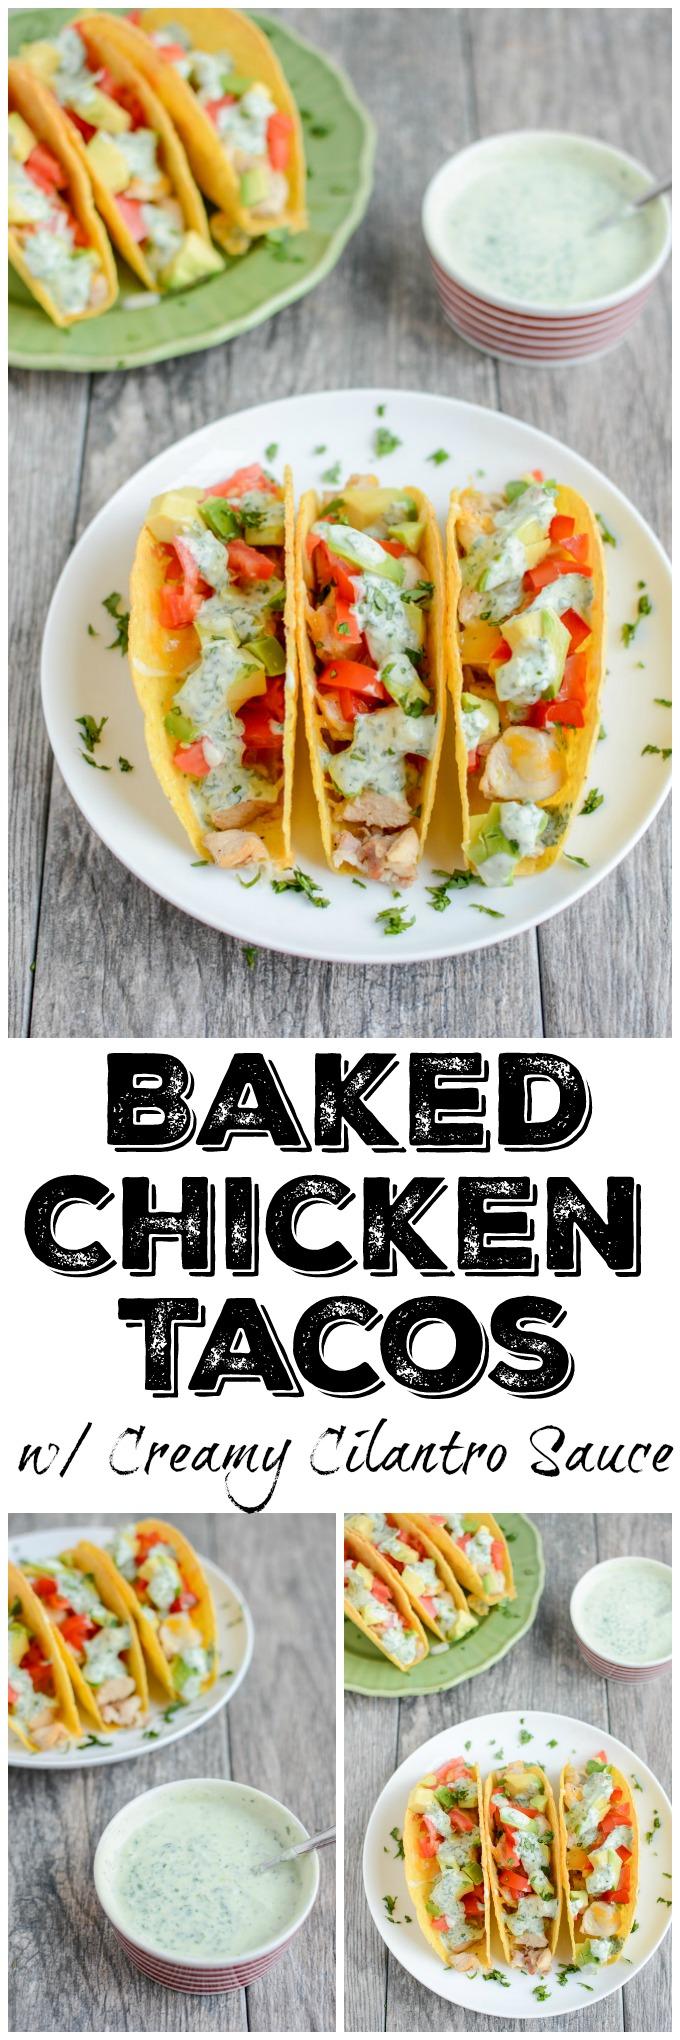 These gluten-free Baked Chicken Tacos with Creamy Cilantro Sauce will quickly become a favorite family dinner recipe! 